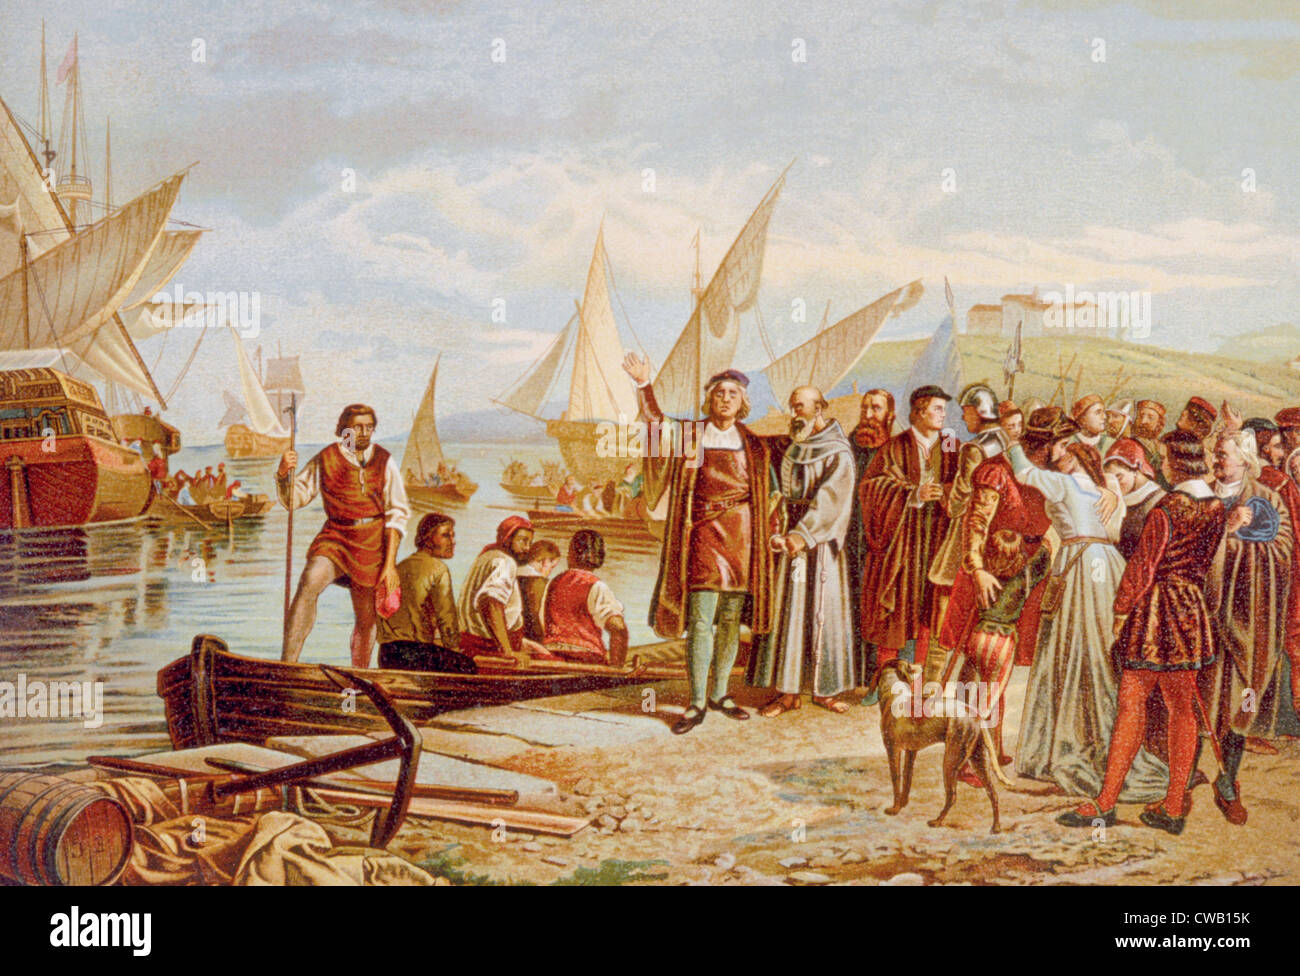 Christopher Columbus' embarkation from the port of Palos, Spain on August 3, 1492 Stock Photo